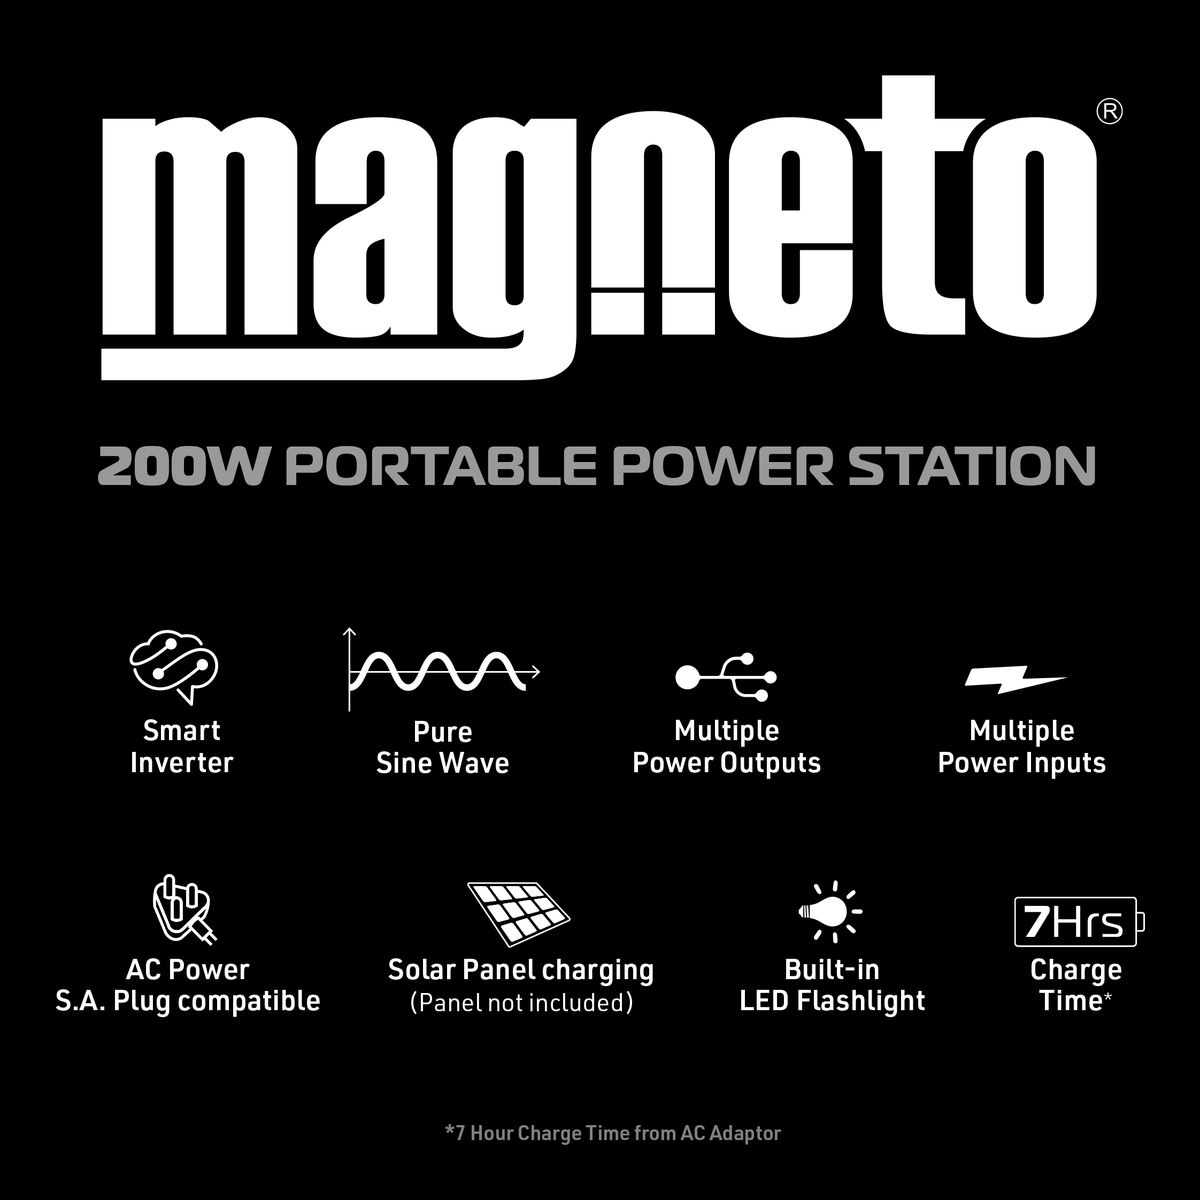 Magneto 200W (202Wh) Portable Power Backup Station